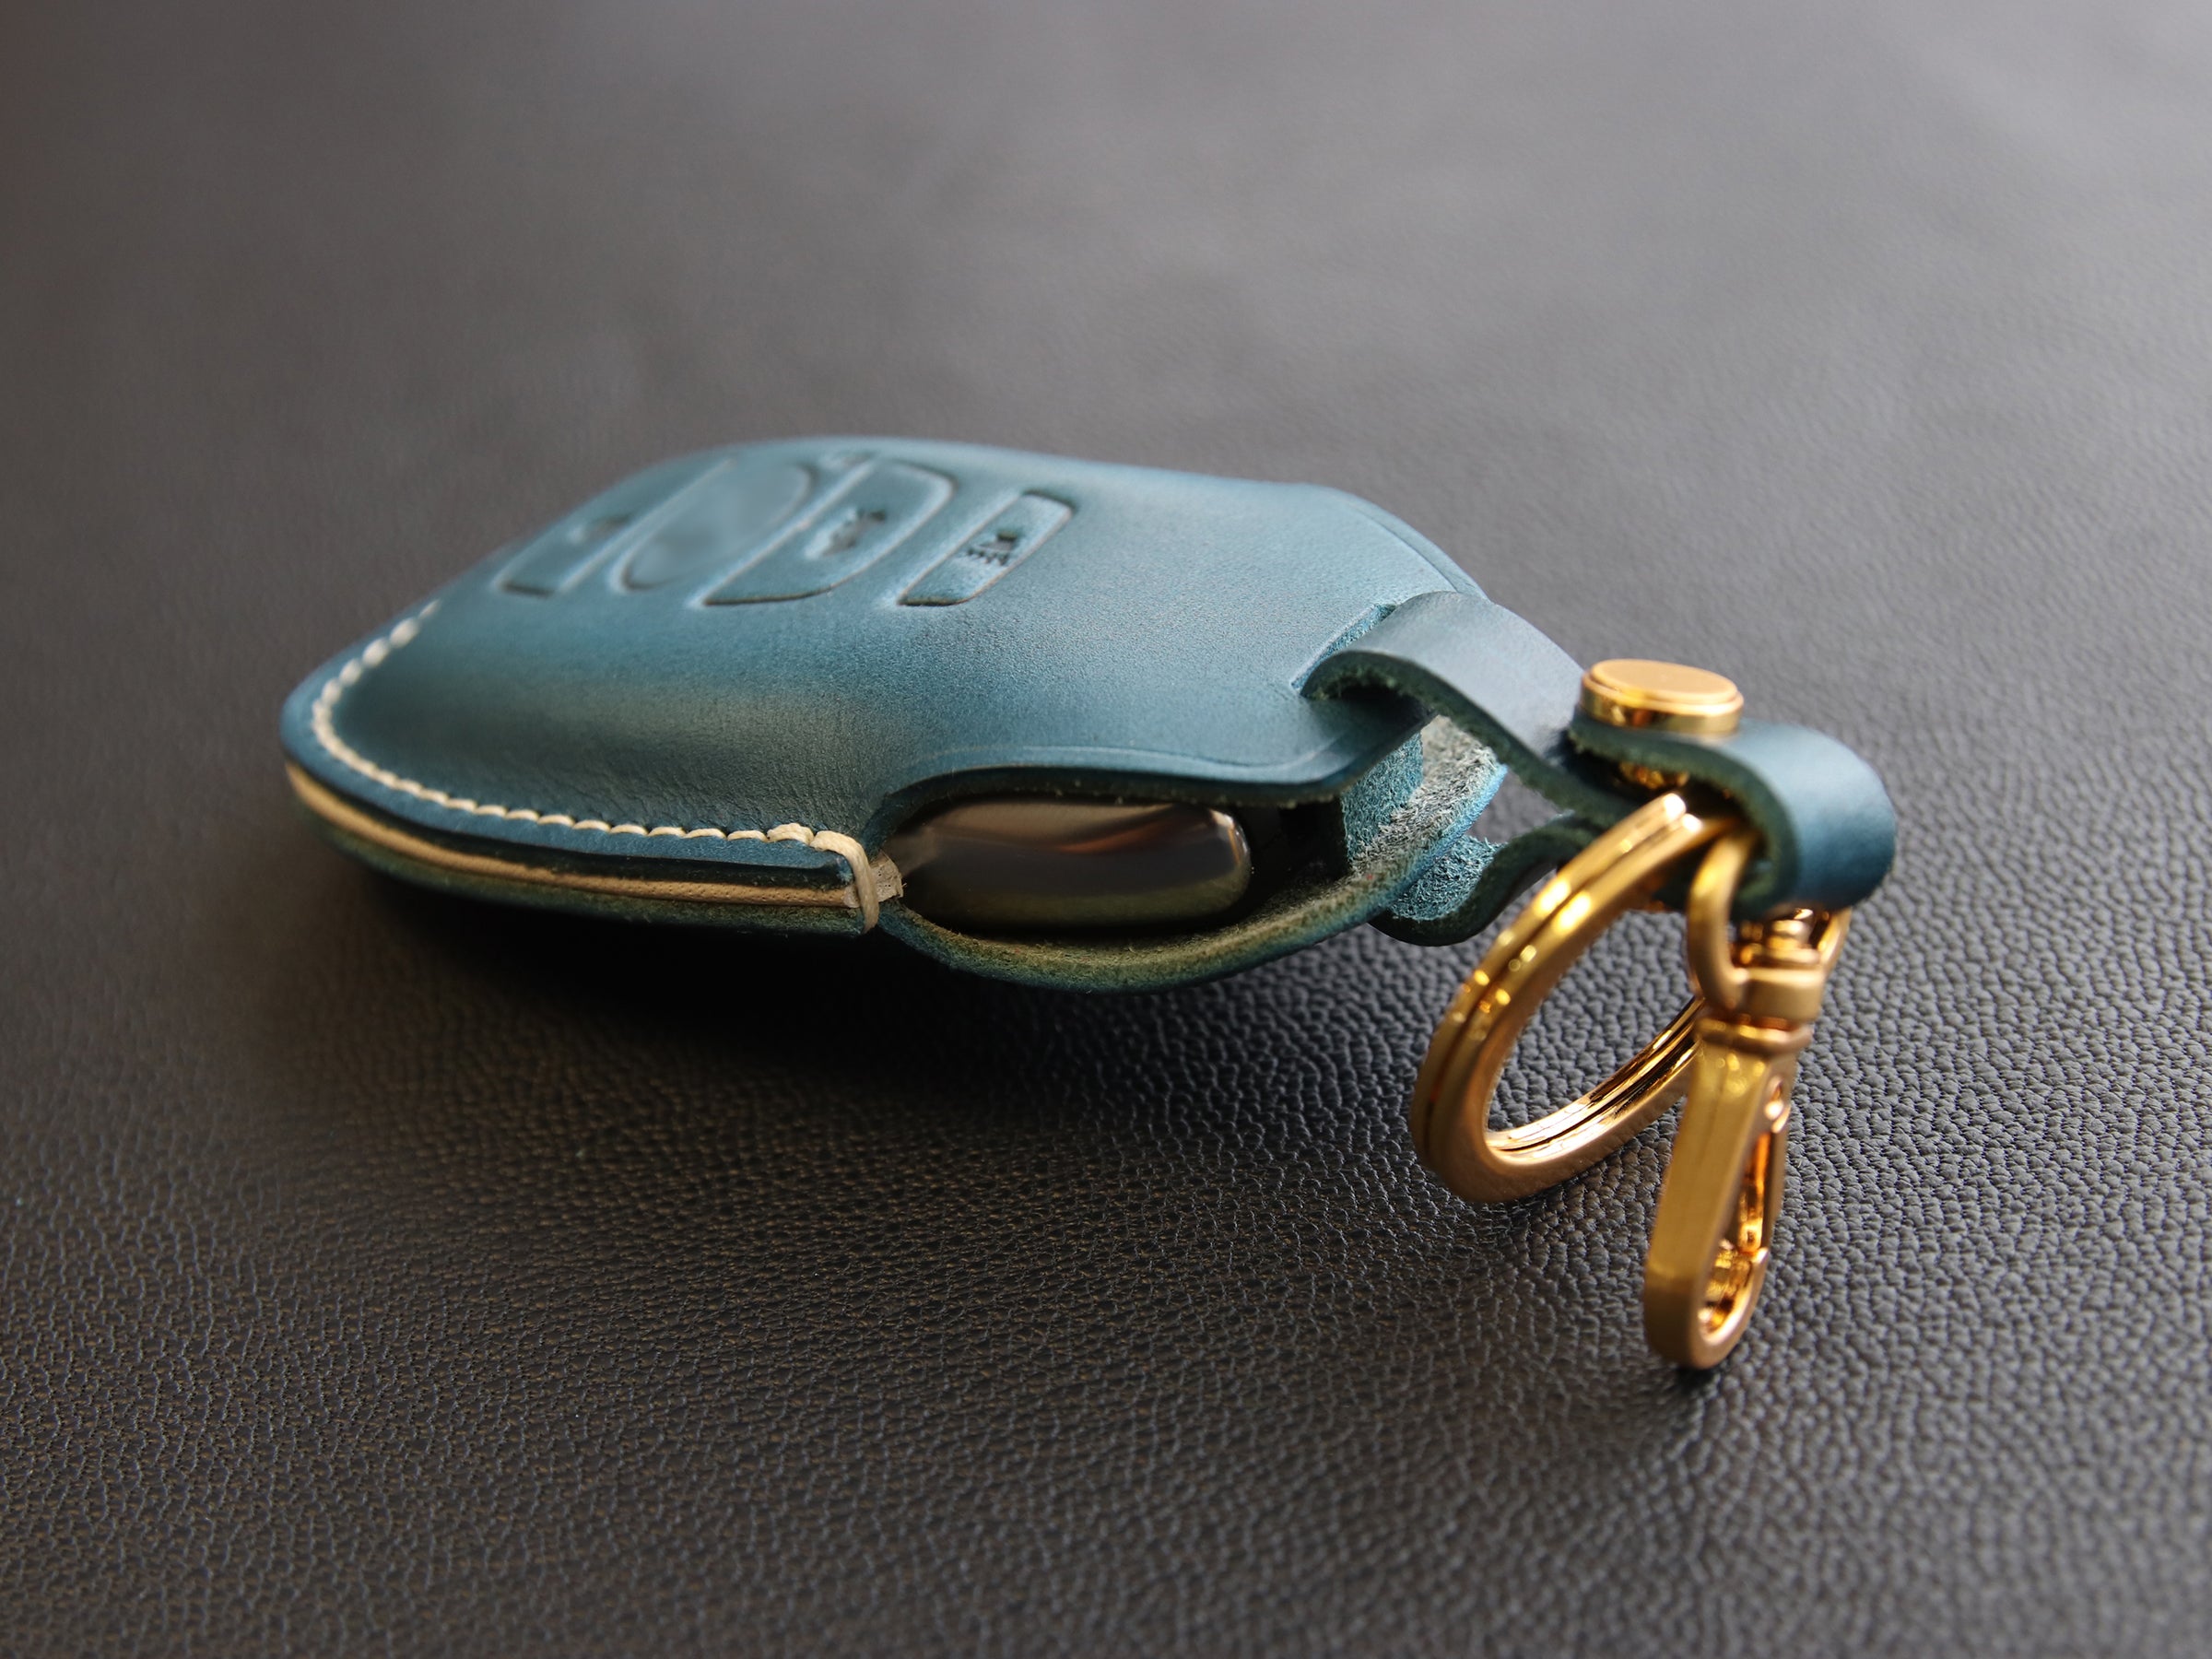 QBUC for Subaru Key Fob Cover with leather Keychain,fit Forester Blue